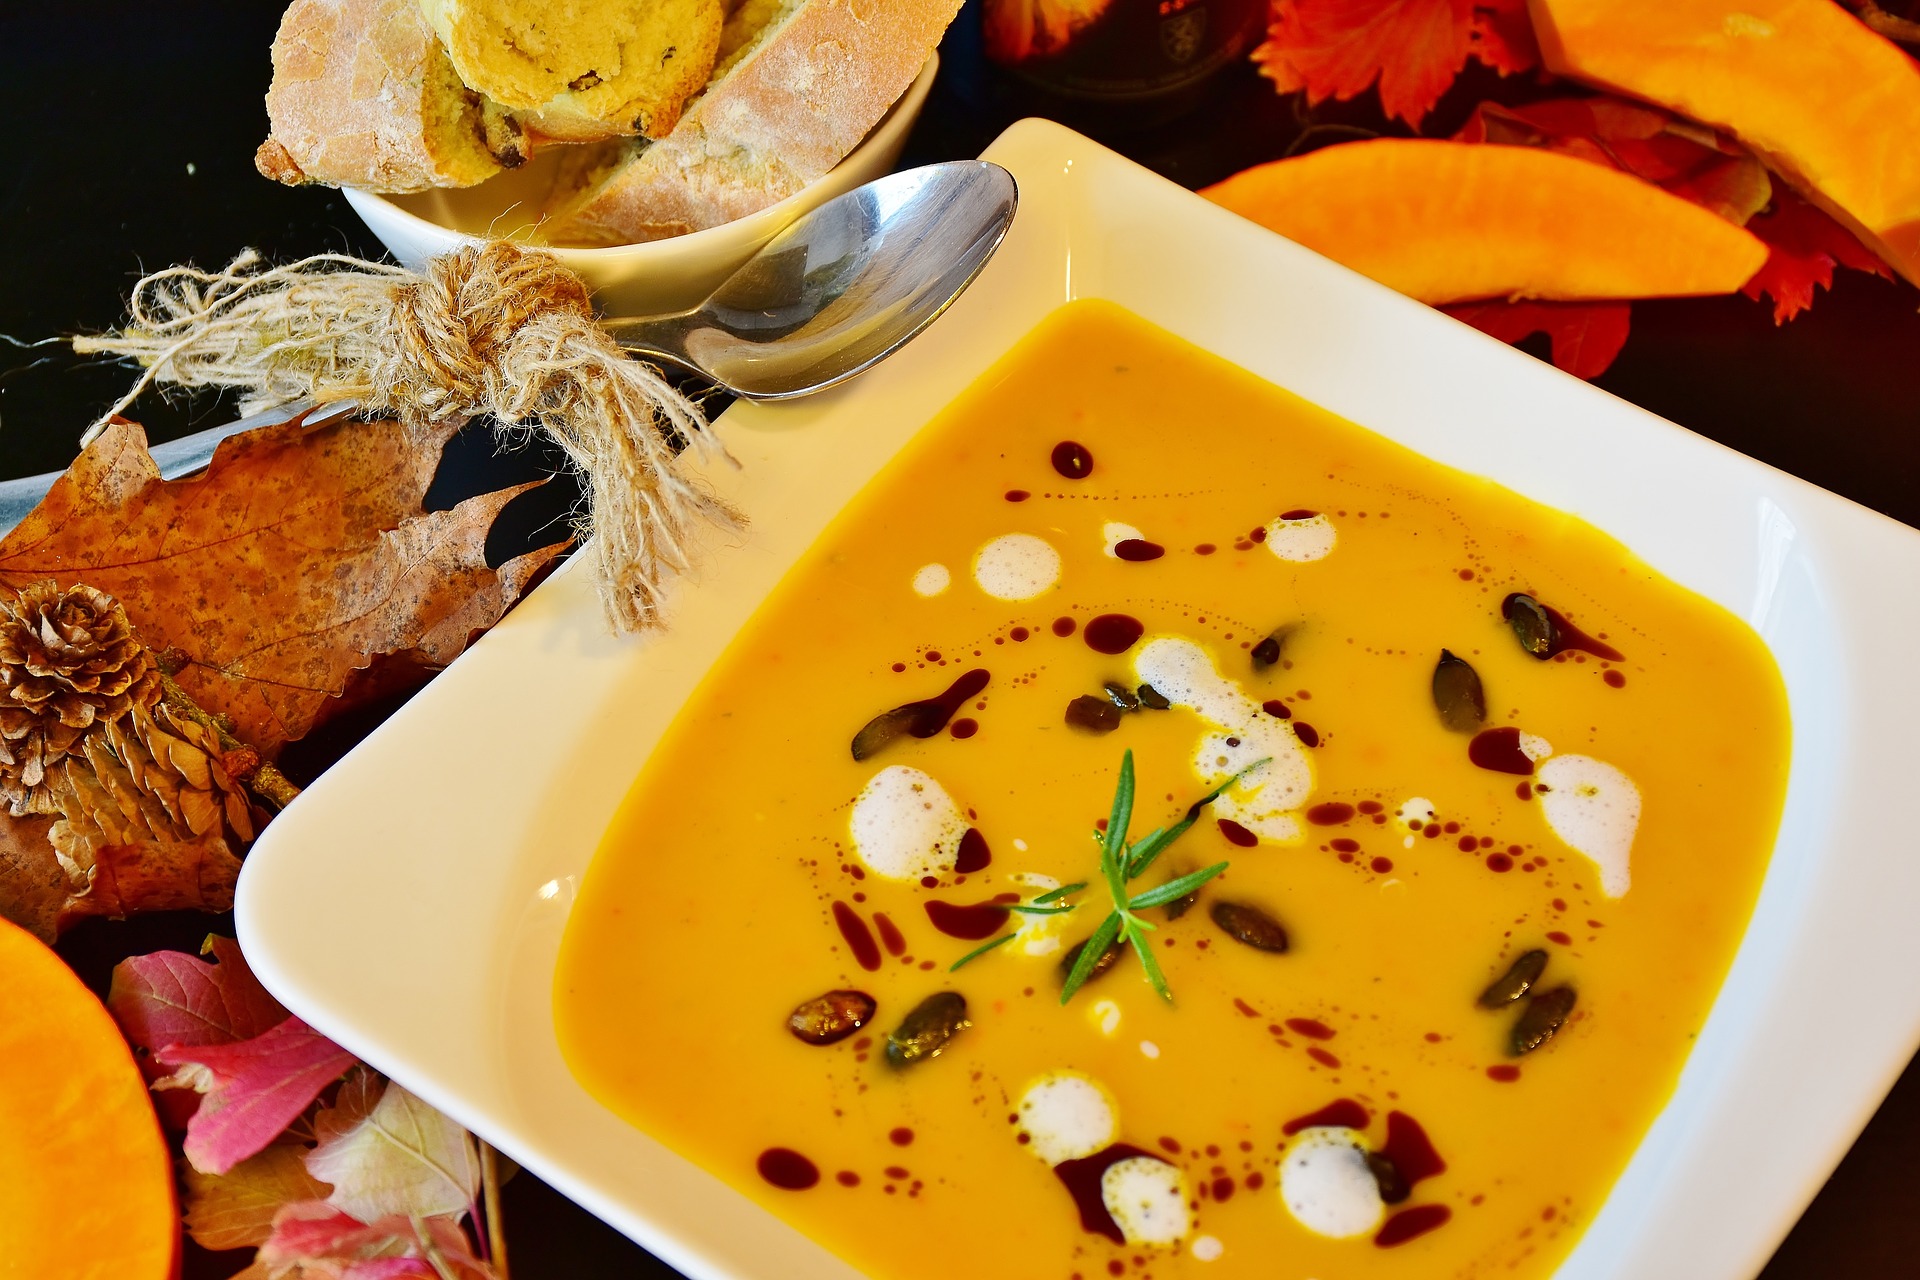 Bowl of butternut squash soup with white and dark red garnishes